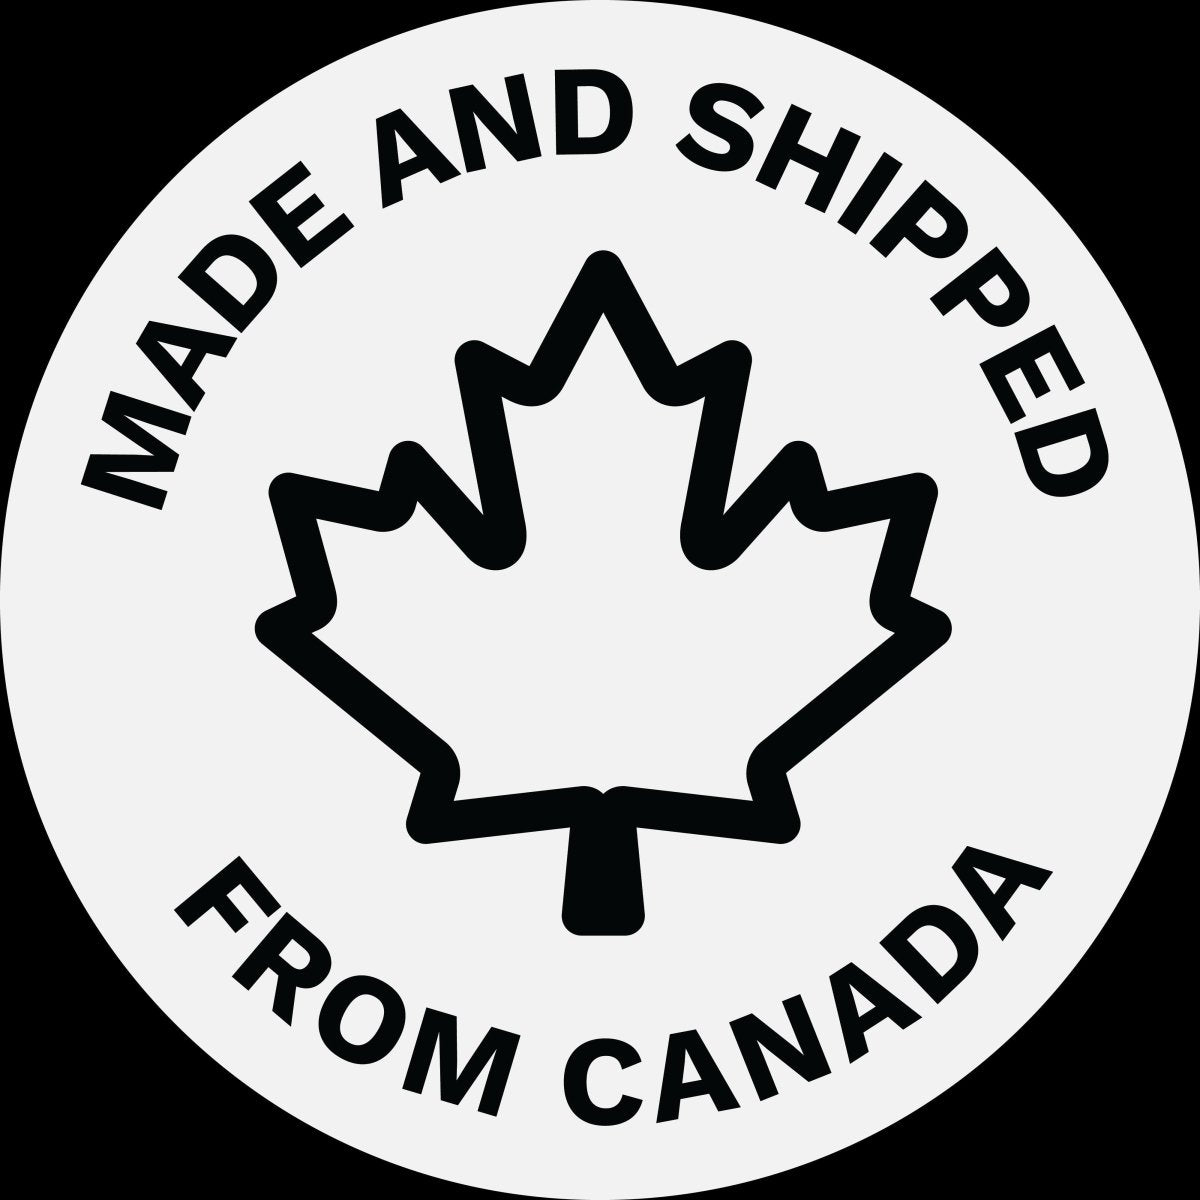 Label indicating the face clay mask is made and shipped from Canada